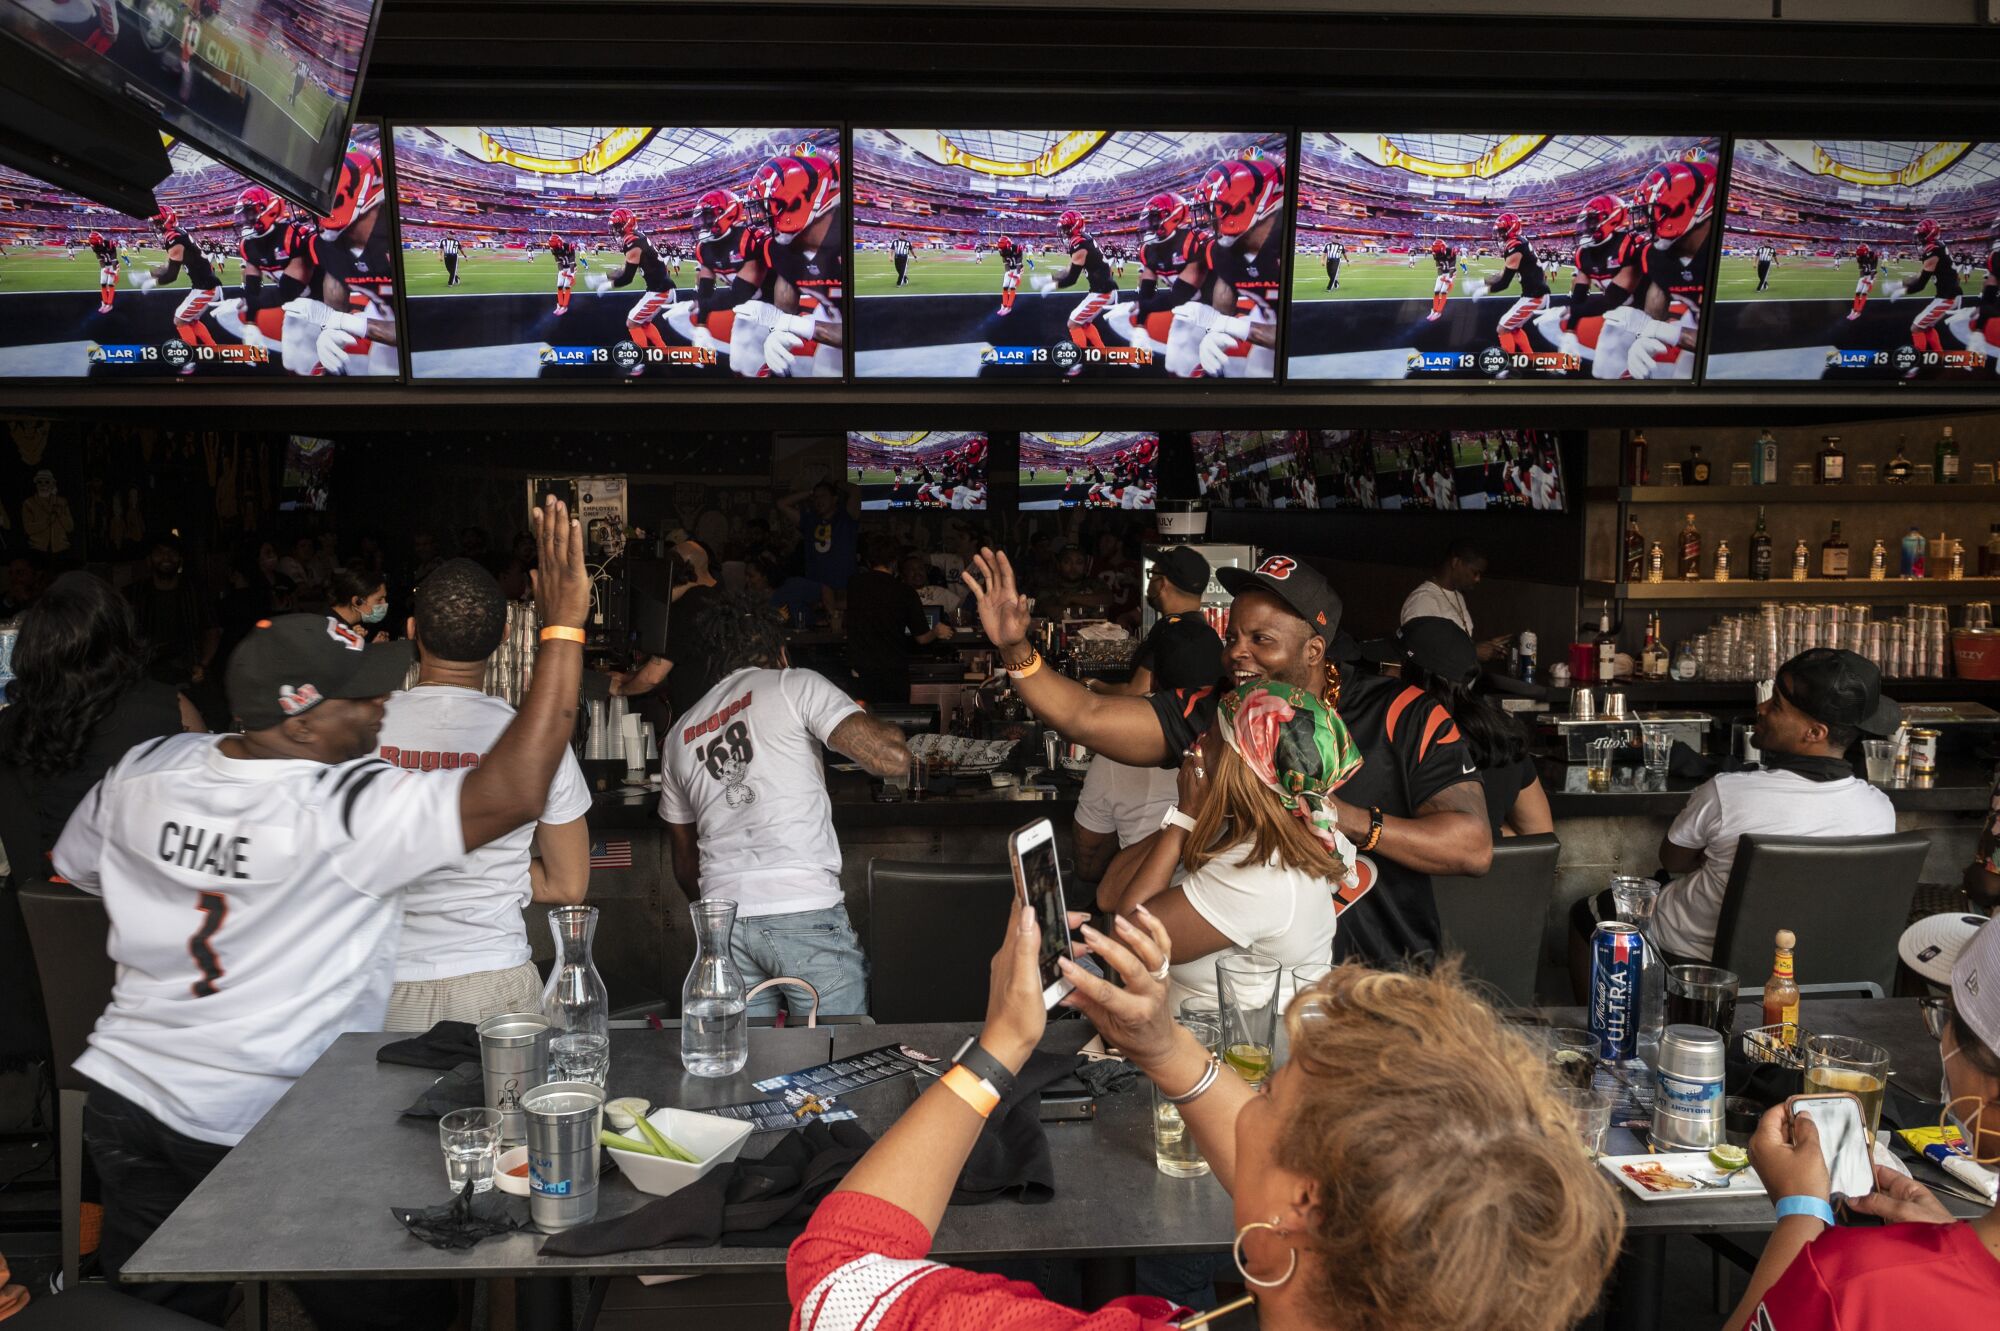 Cincinnati fans watch the Super Bowl at Tom's Watch Bar at L.A. Live in Downtown Los Angeles.